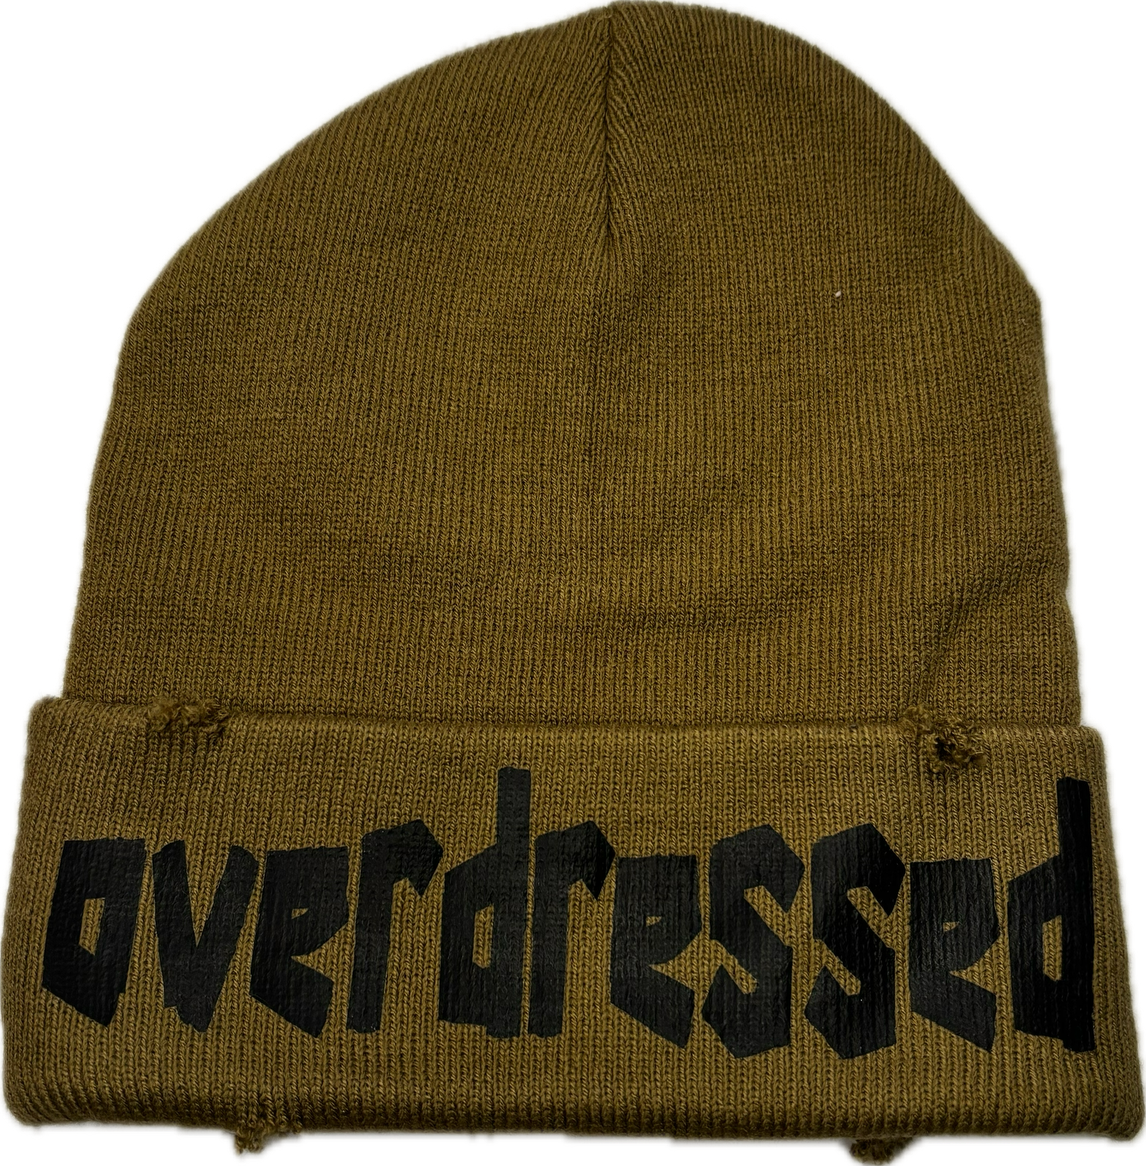 Overdressed beanie